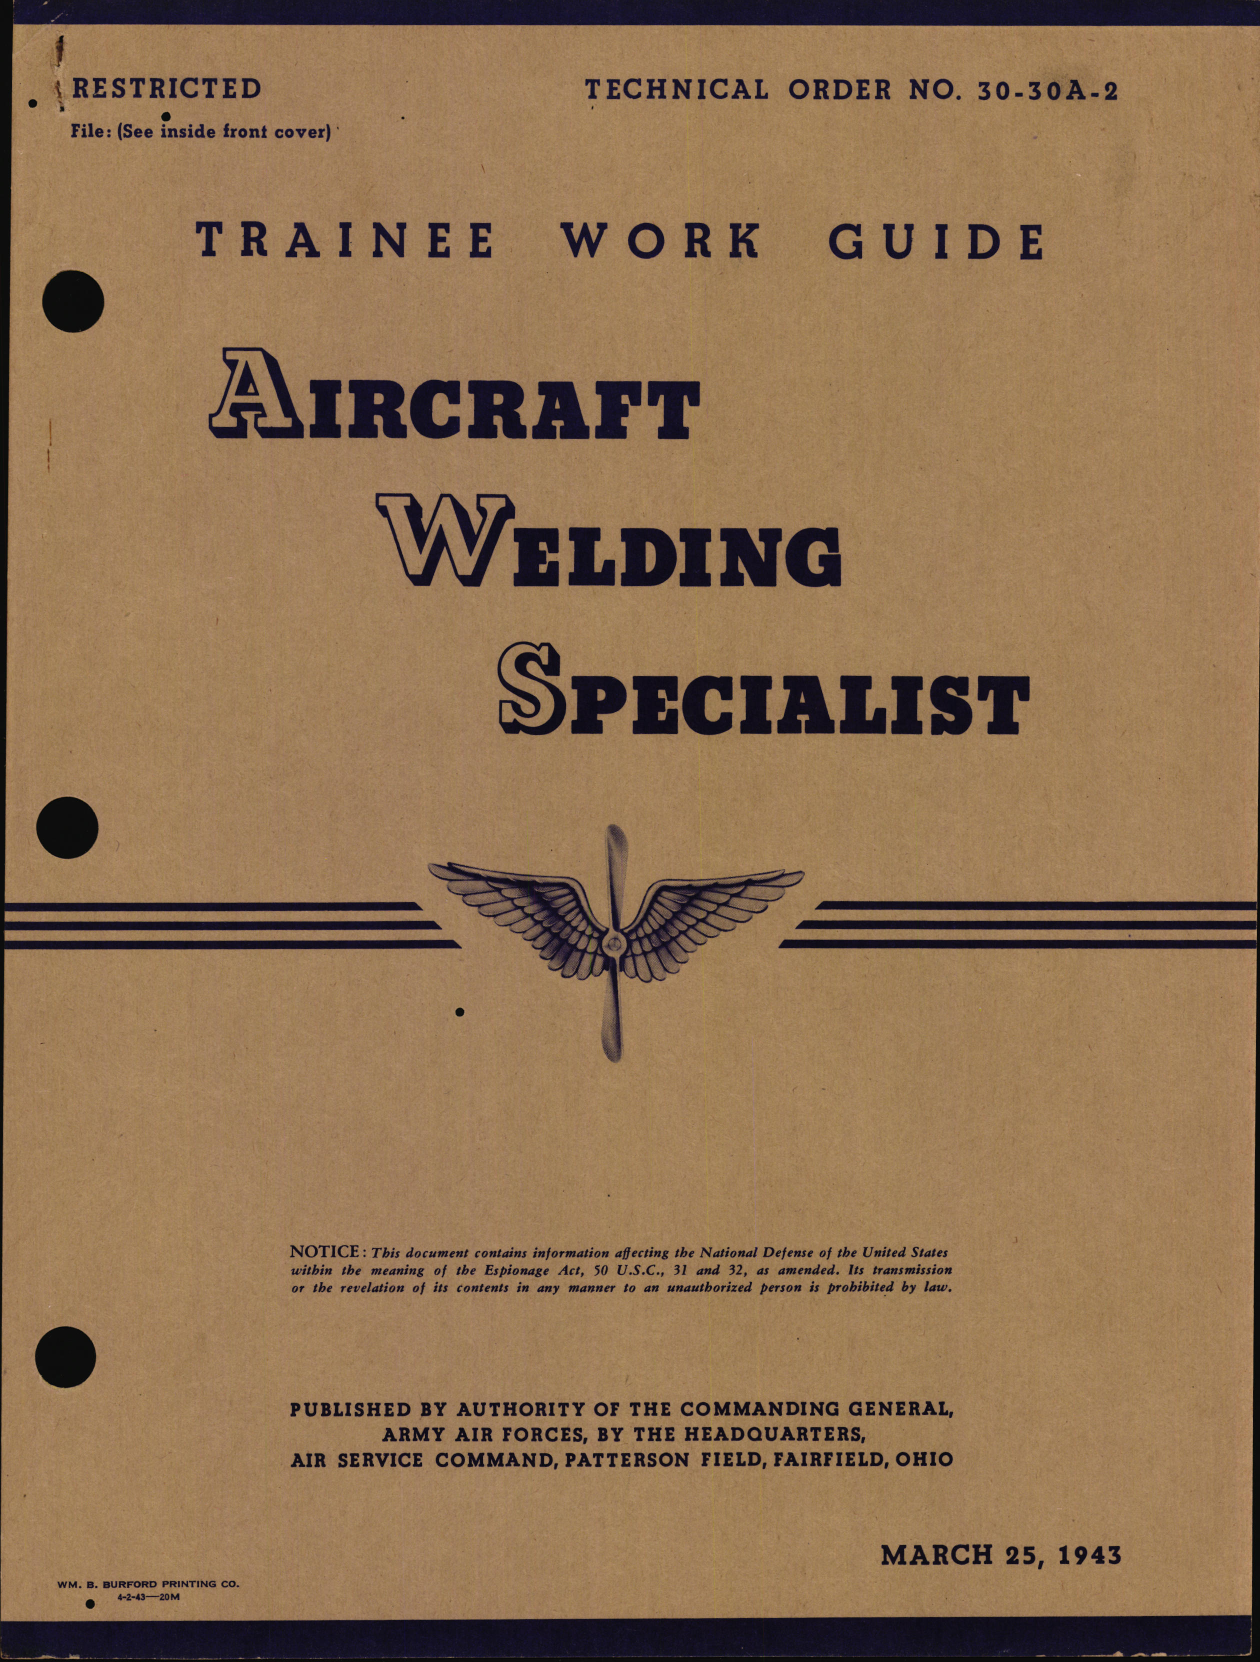 Sample page 1 from AirCorps Library document: Trainee Work Guide for Aircraft Welding Specialist